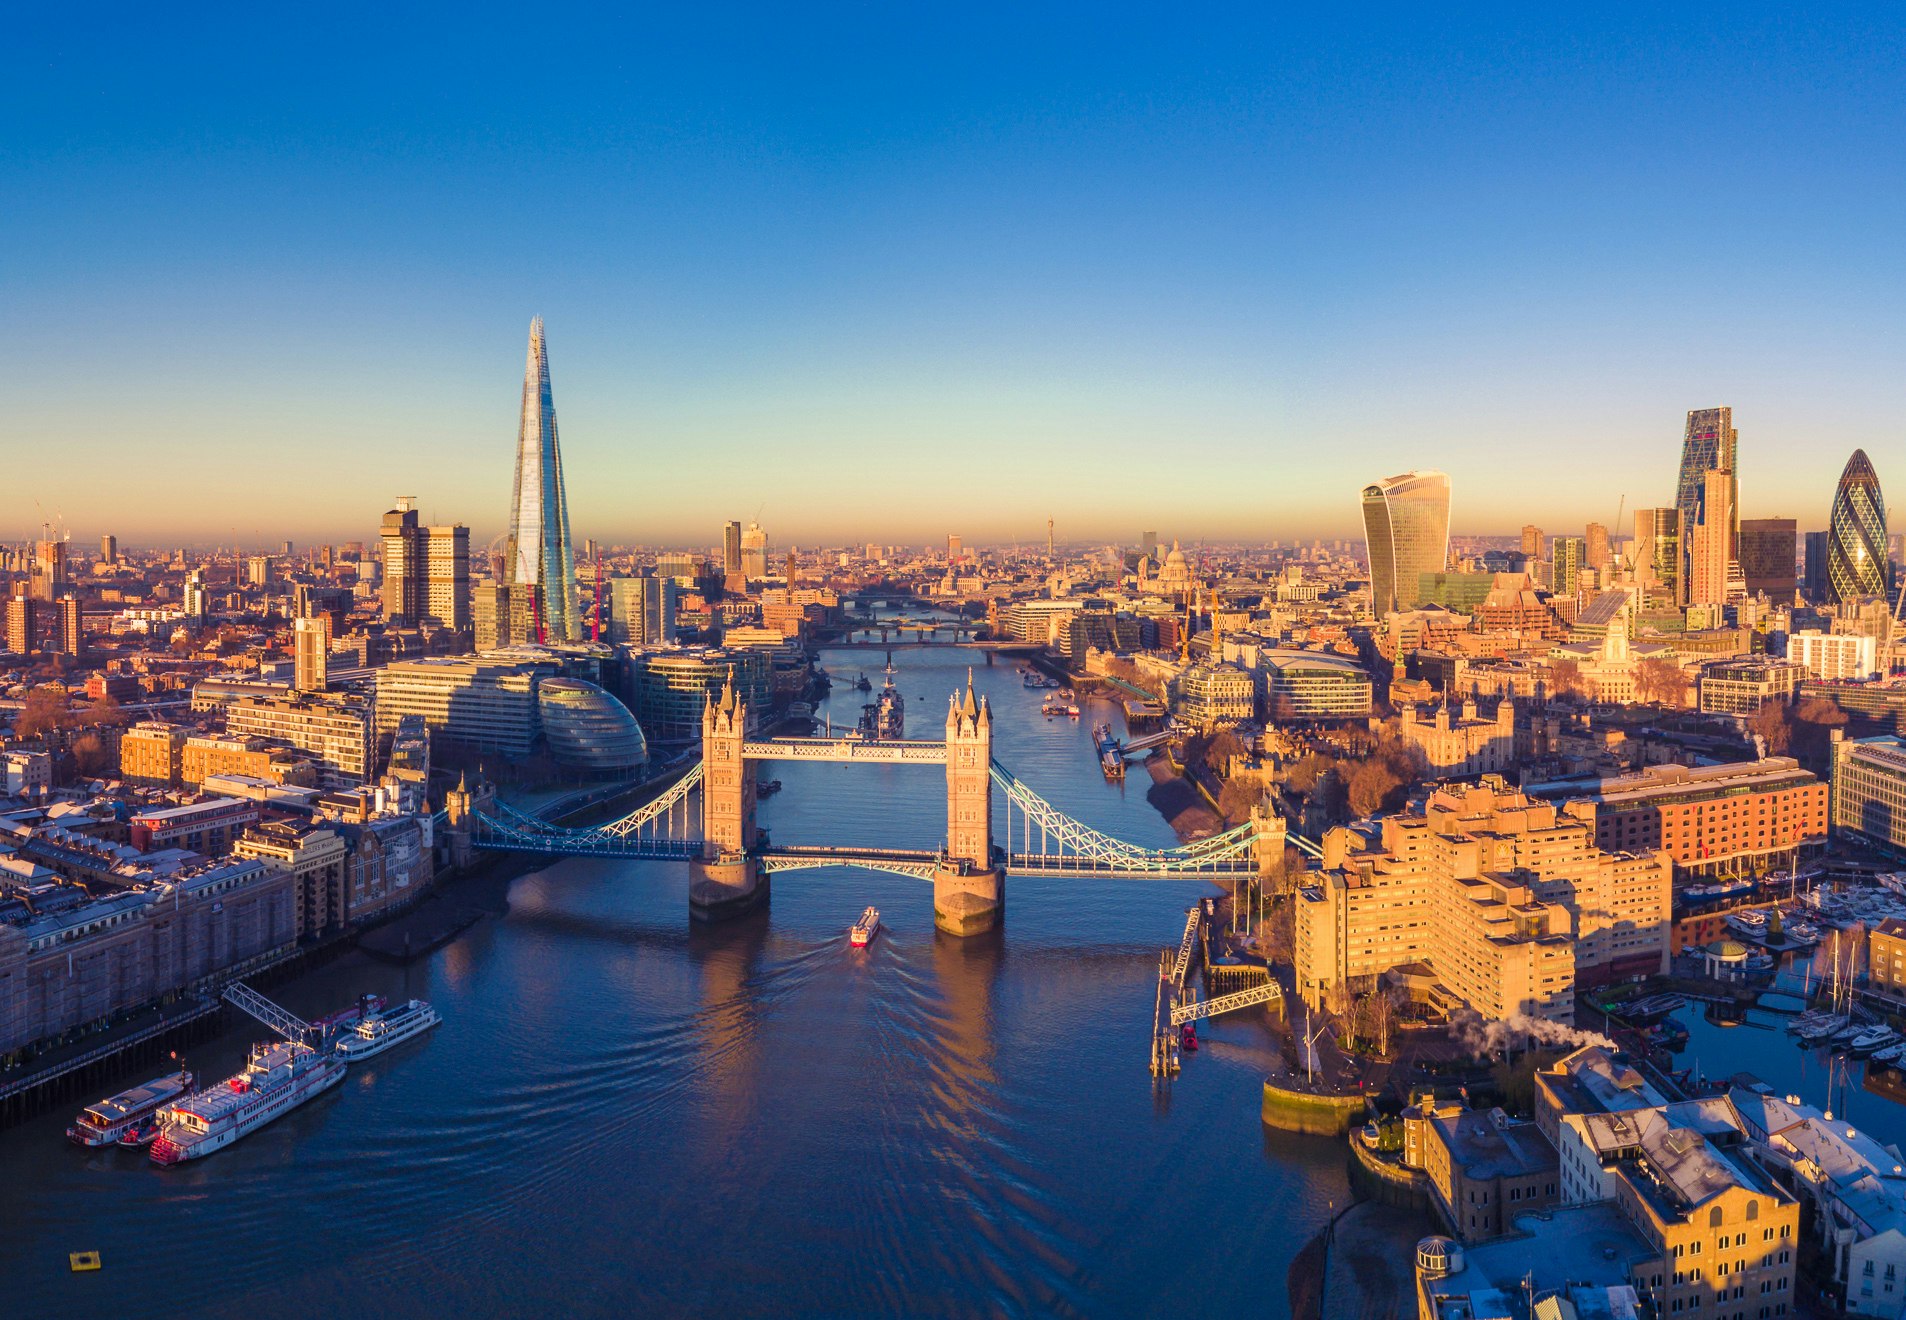 London came fifth in the ranking, scoring points for it's bar and food scene and wealth of things to do.